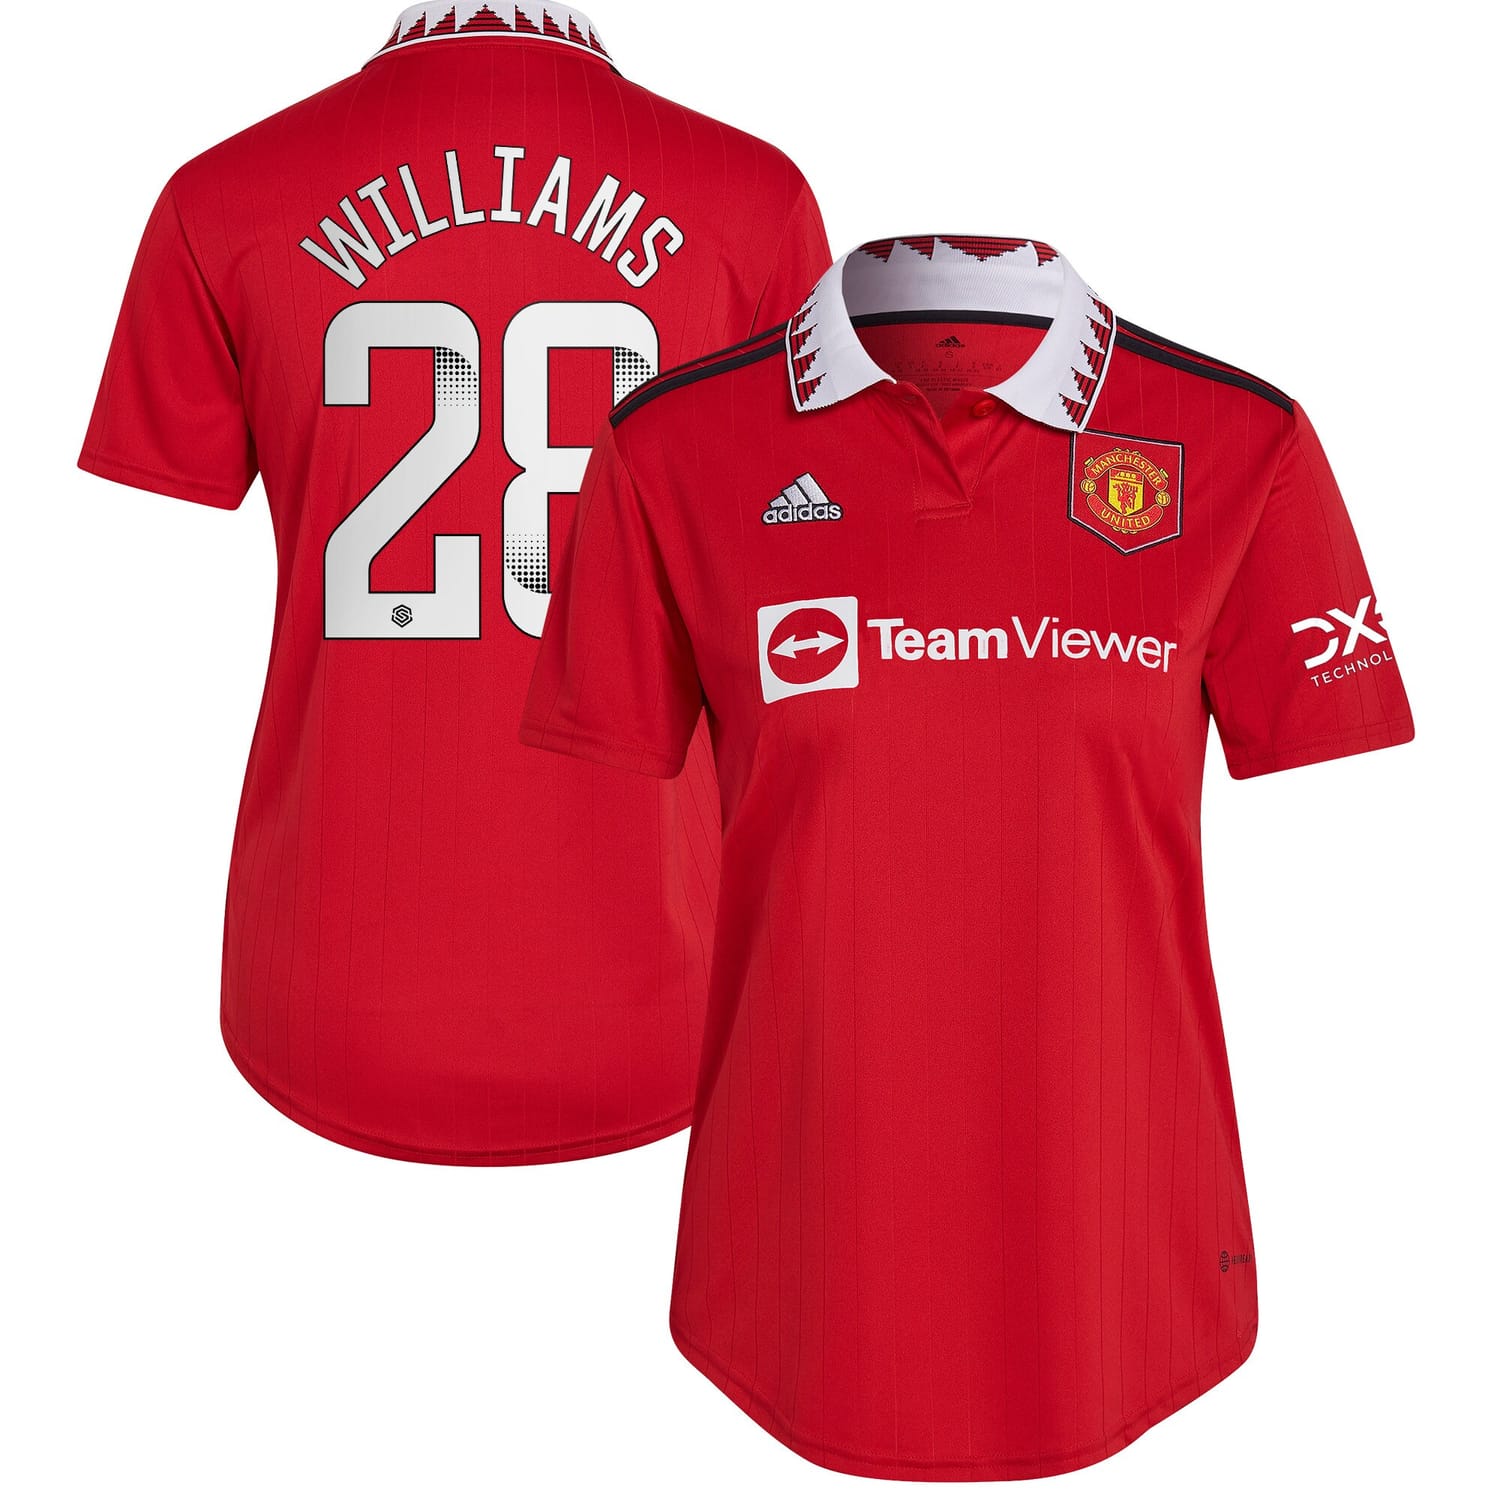 Premier League Manchester United Home WSL Jersey Shirt 2022-23 player Rachel Williams 28 printing for Women